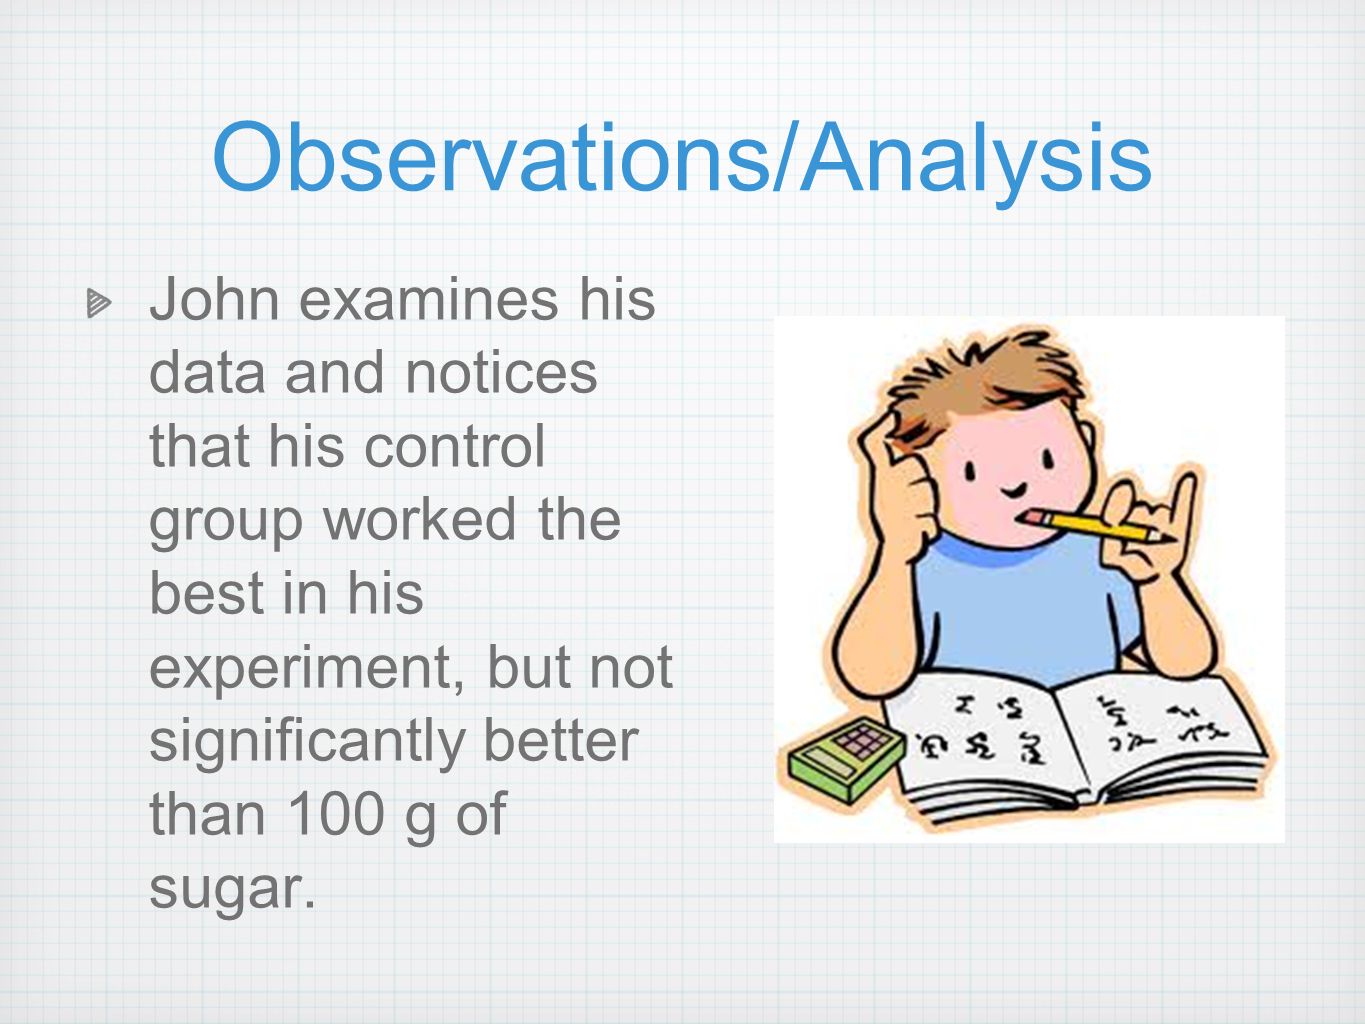 Observations/Analysis John examines his data and notices that his control group worked the best in his experiment, but not significantly better than 100 g of sugar.